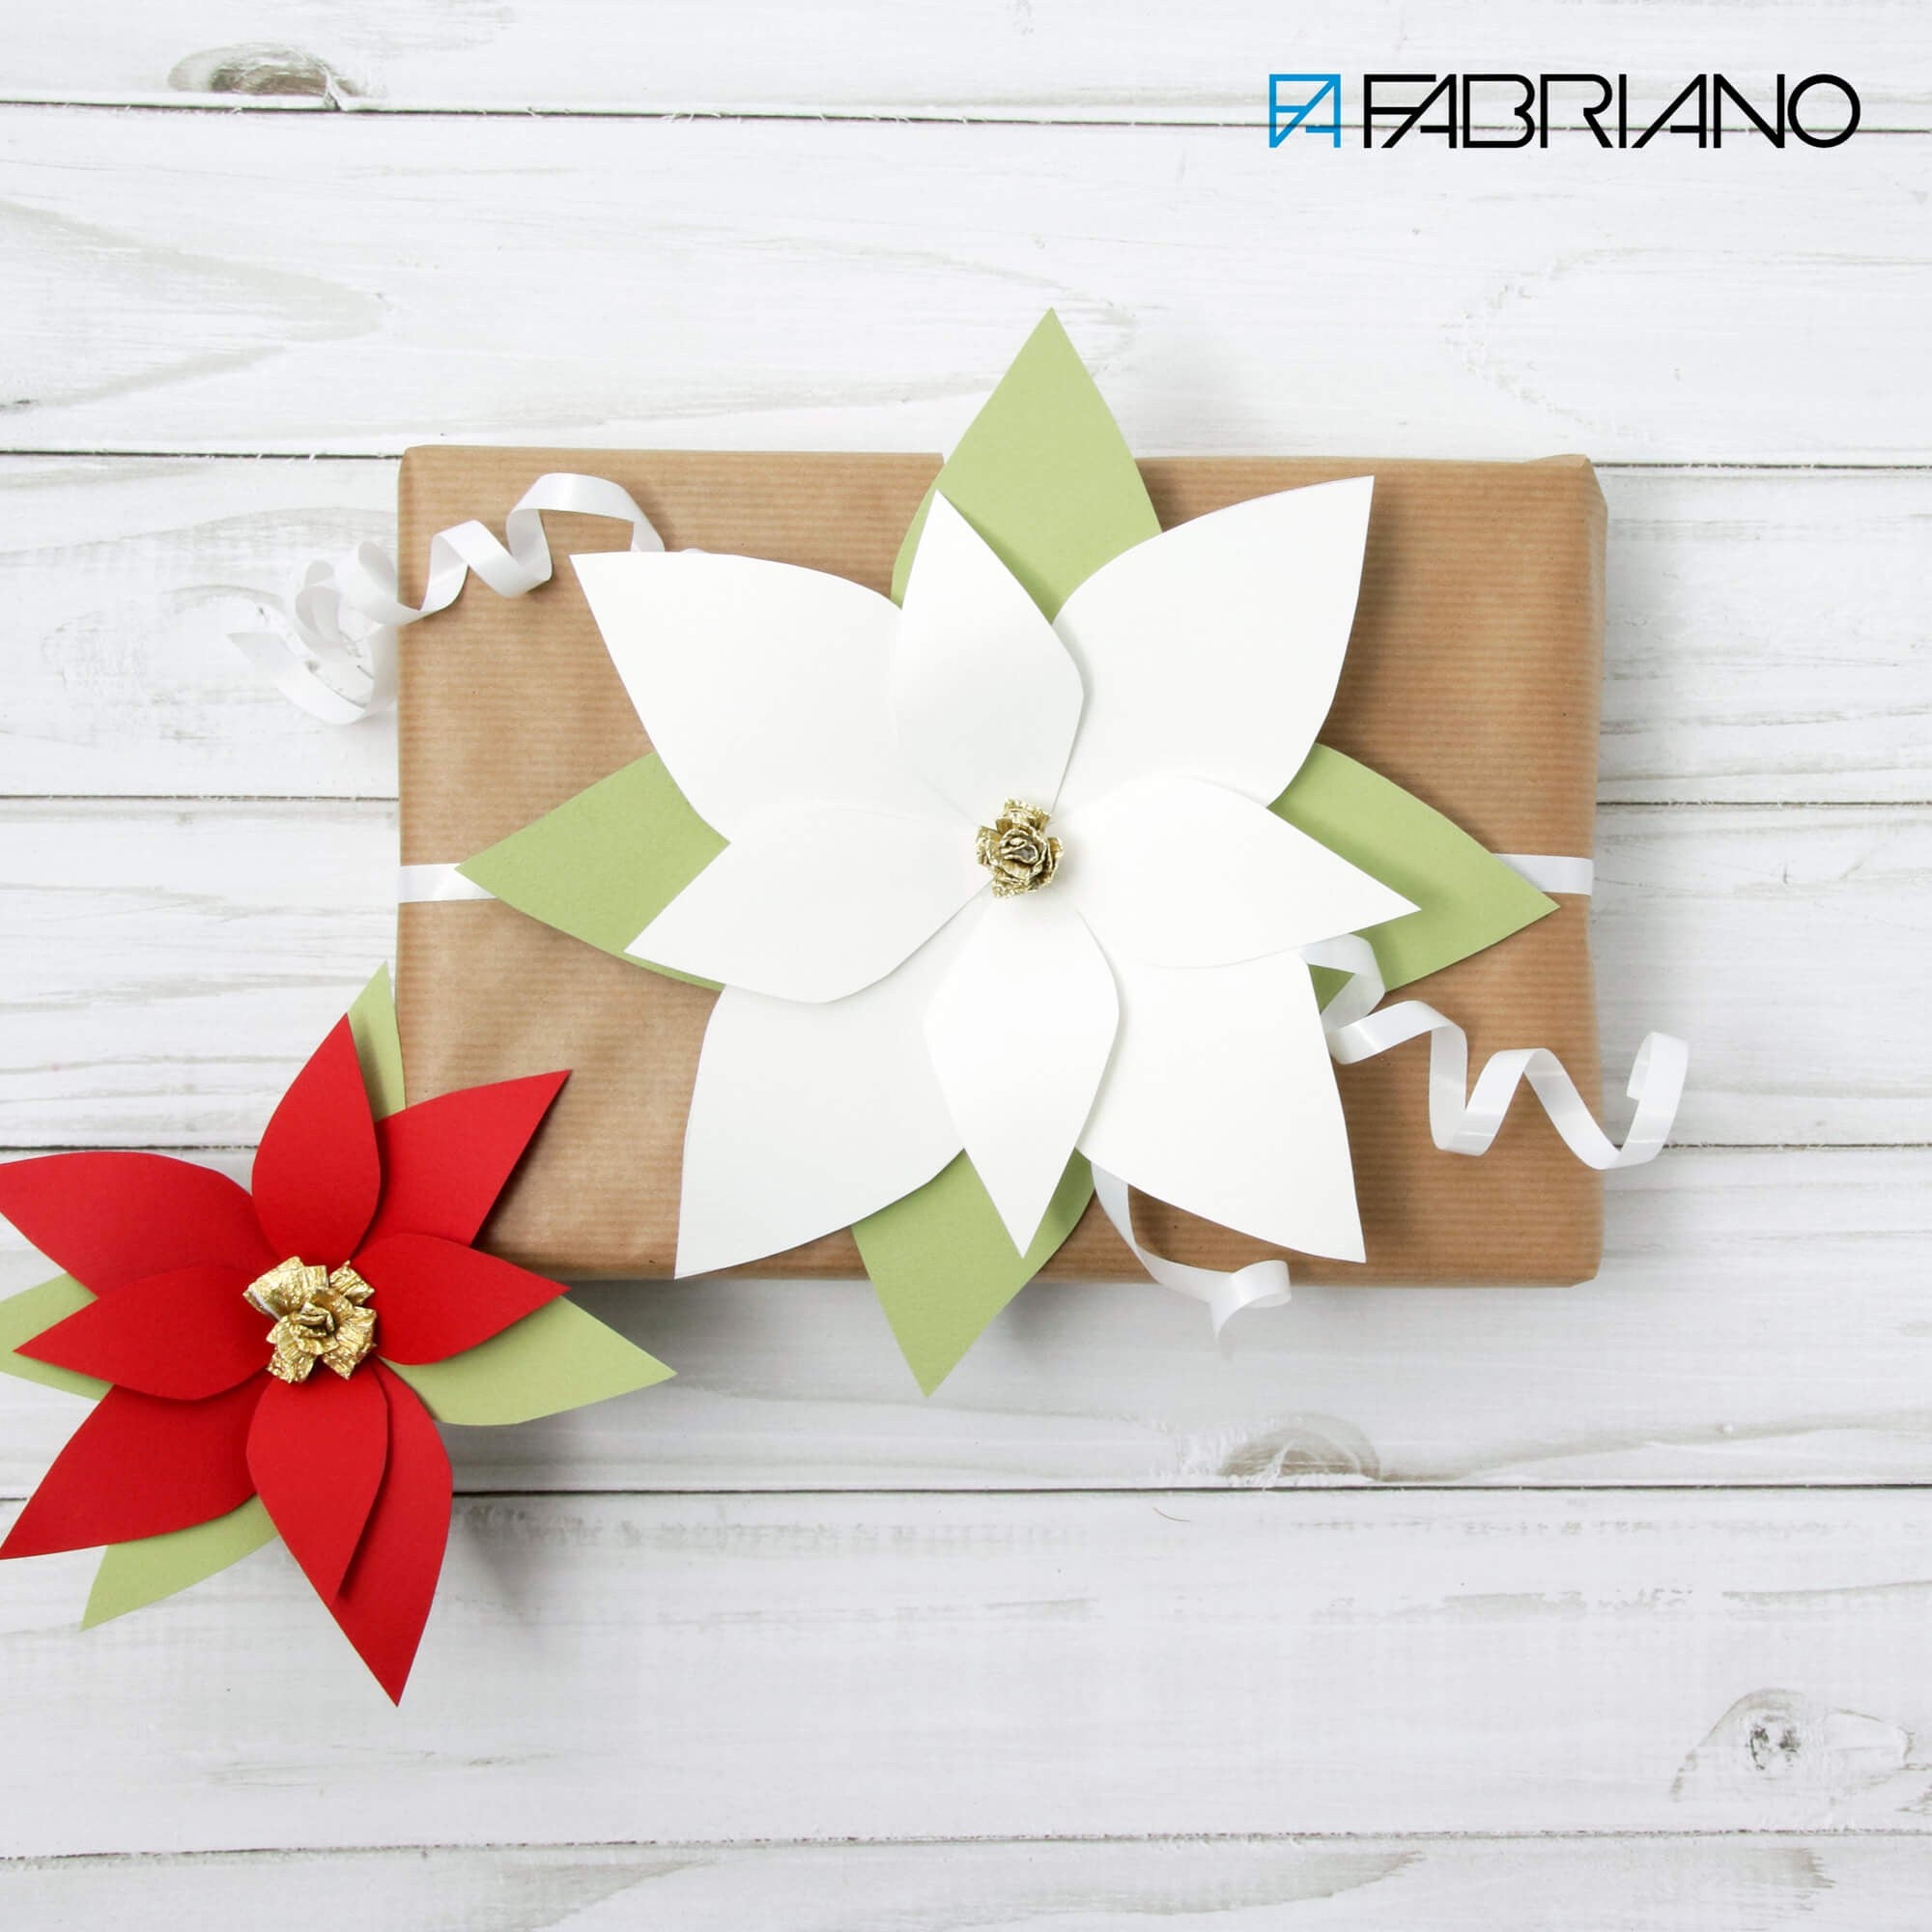 Paper Poinsettias presented by Fabriano